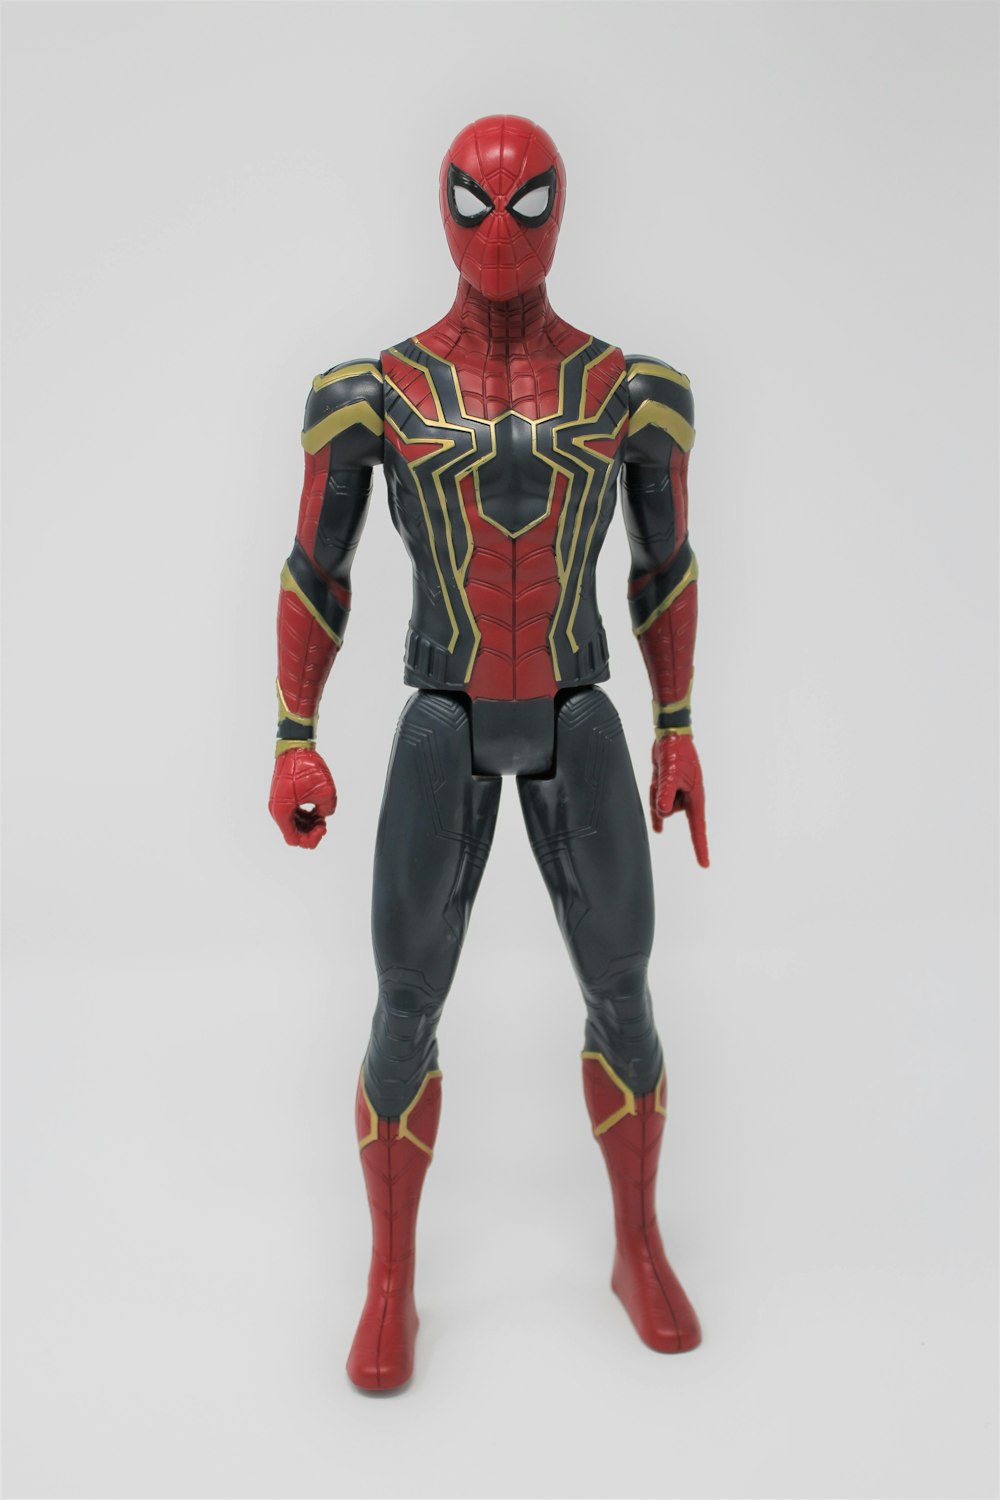 Marvel's spider-man action figure in his iron spider suit photo ...